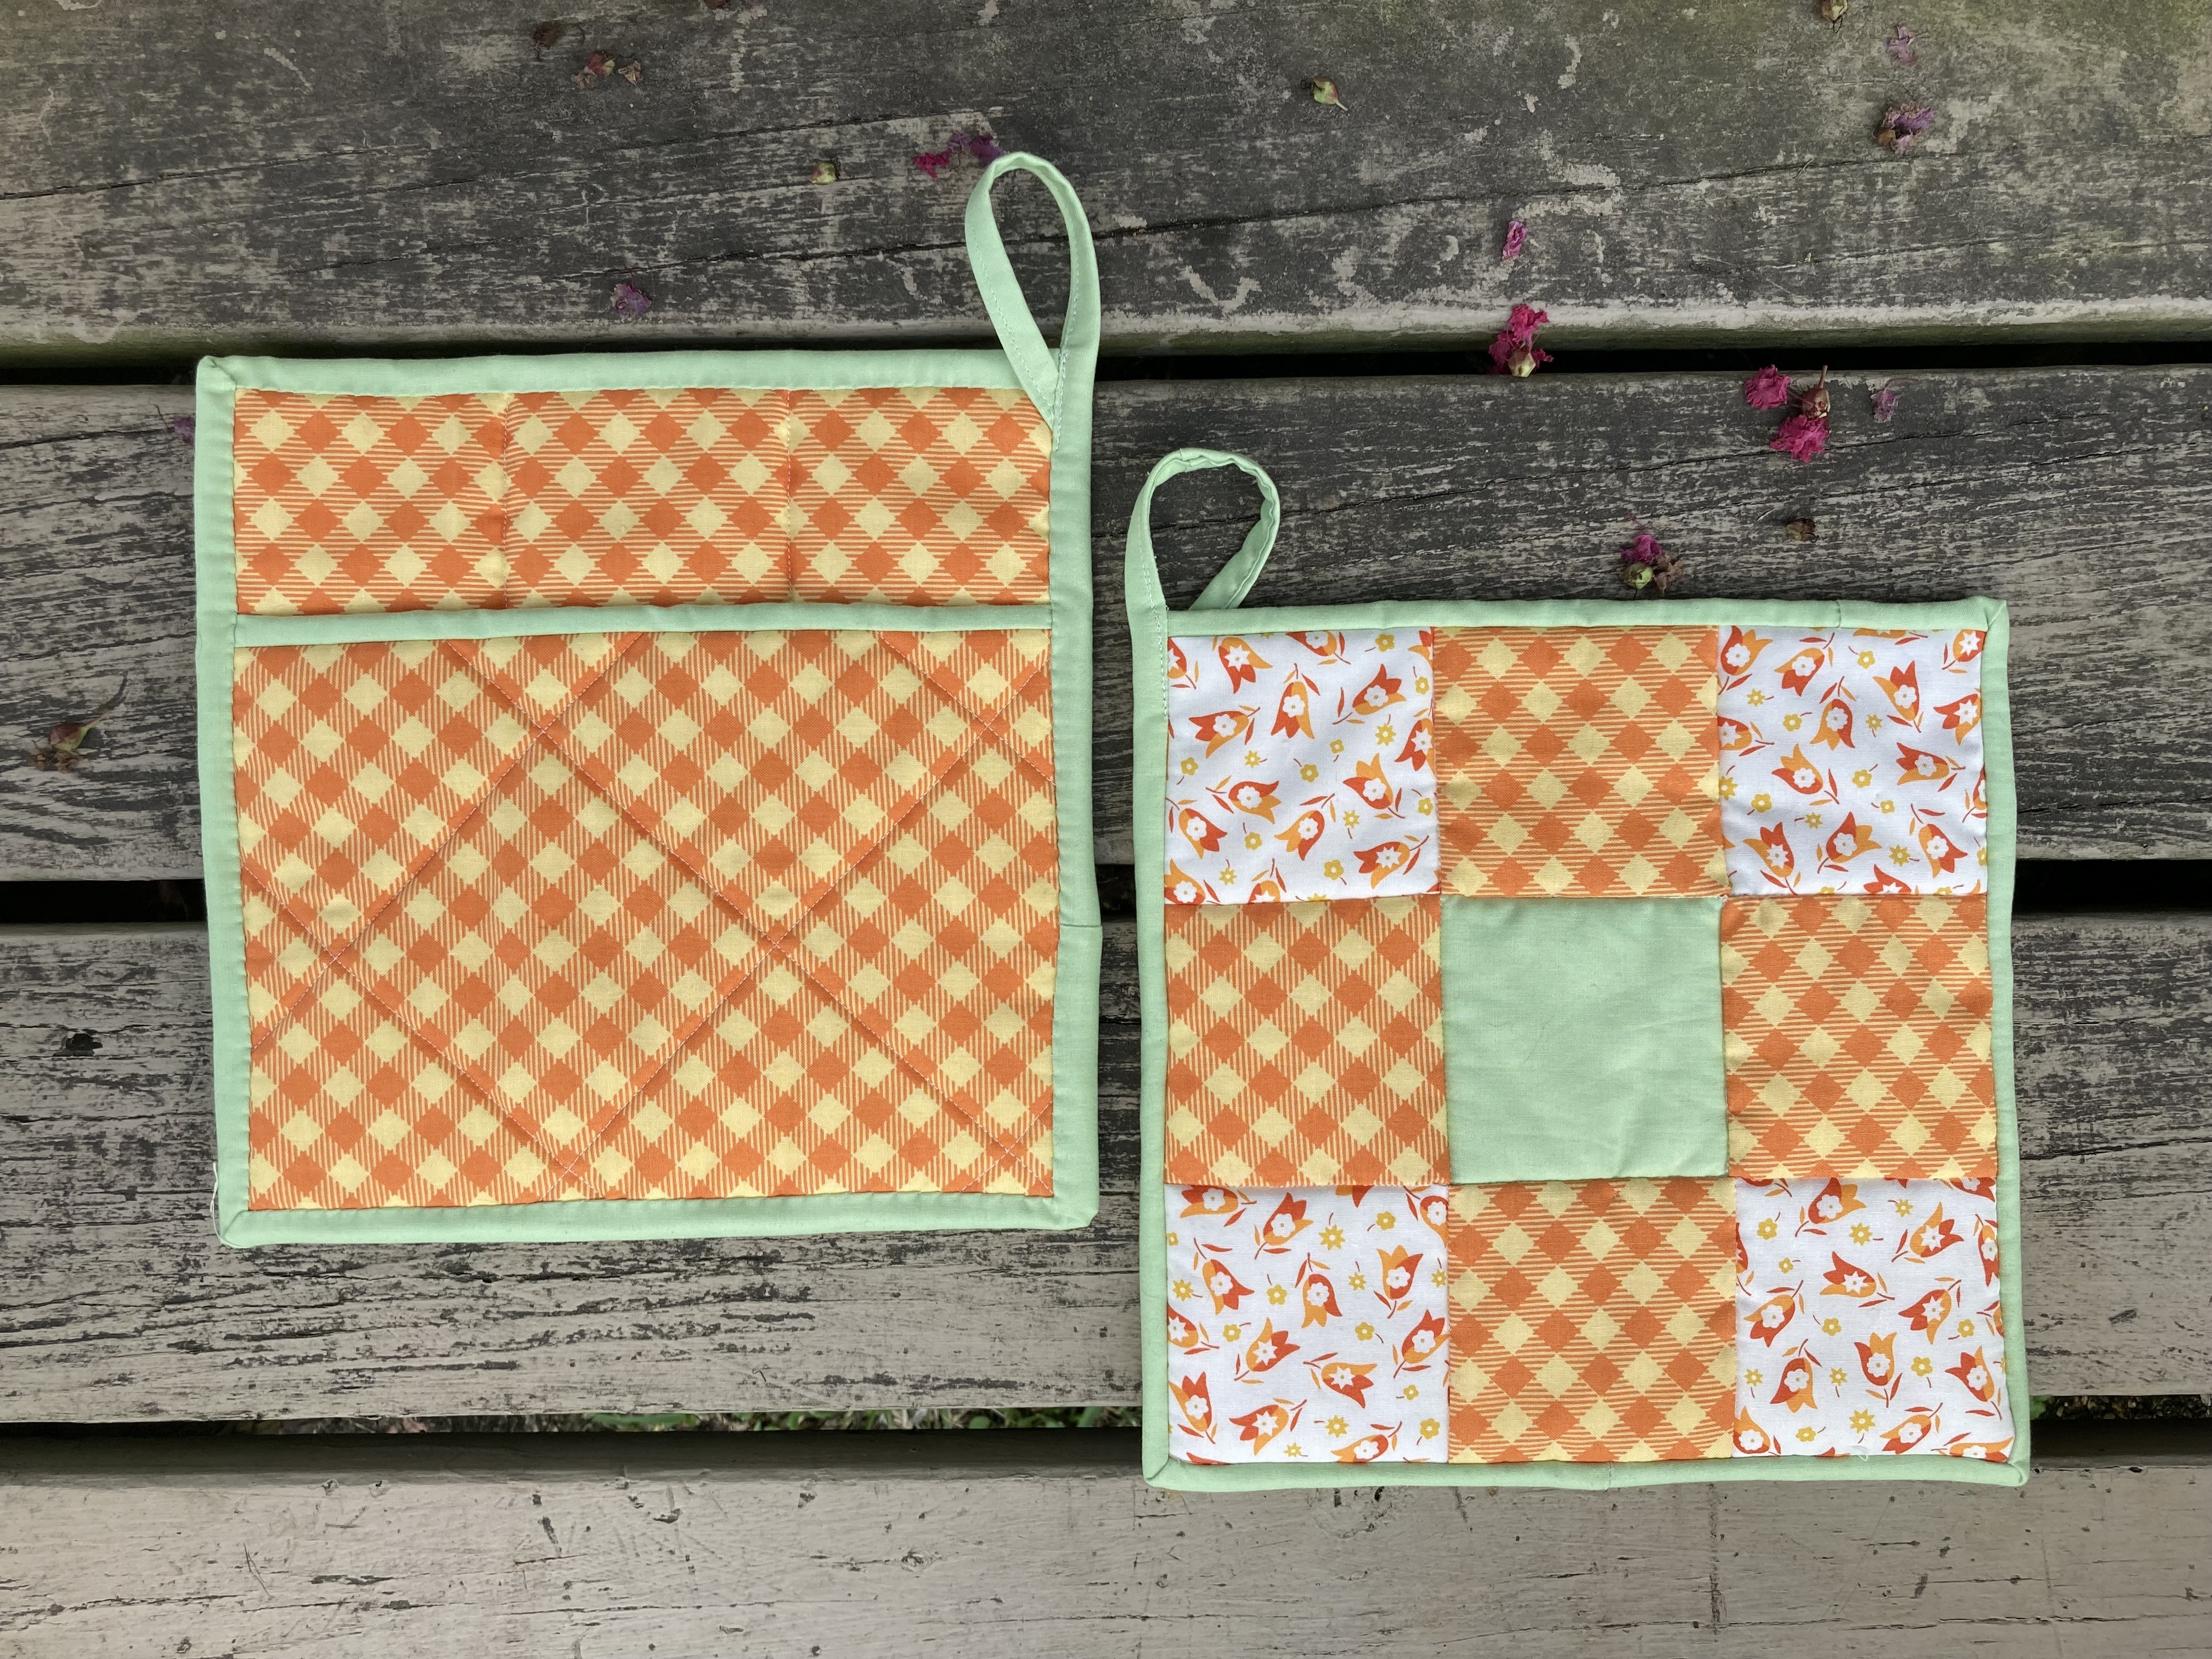 two quilted potholders with orange, white, yellow, and green patterned patches, orange and yellow gingam back pocket, and green border